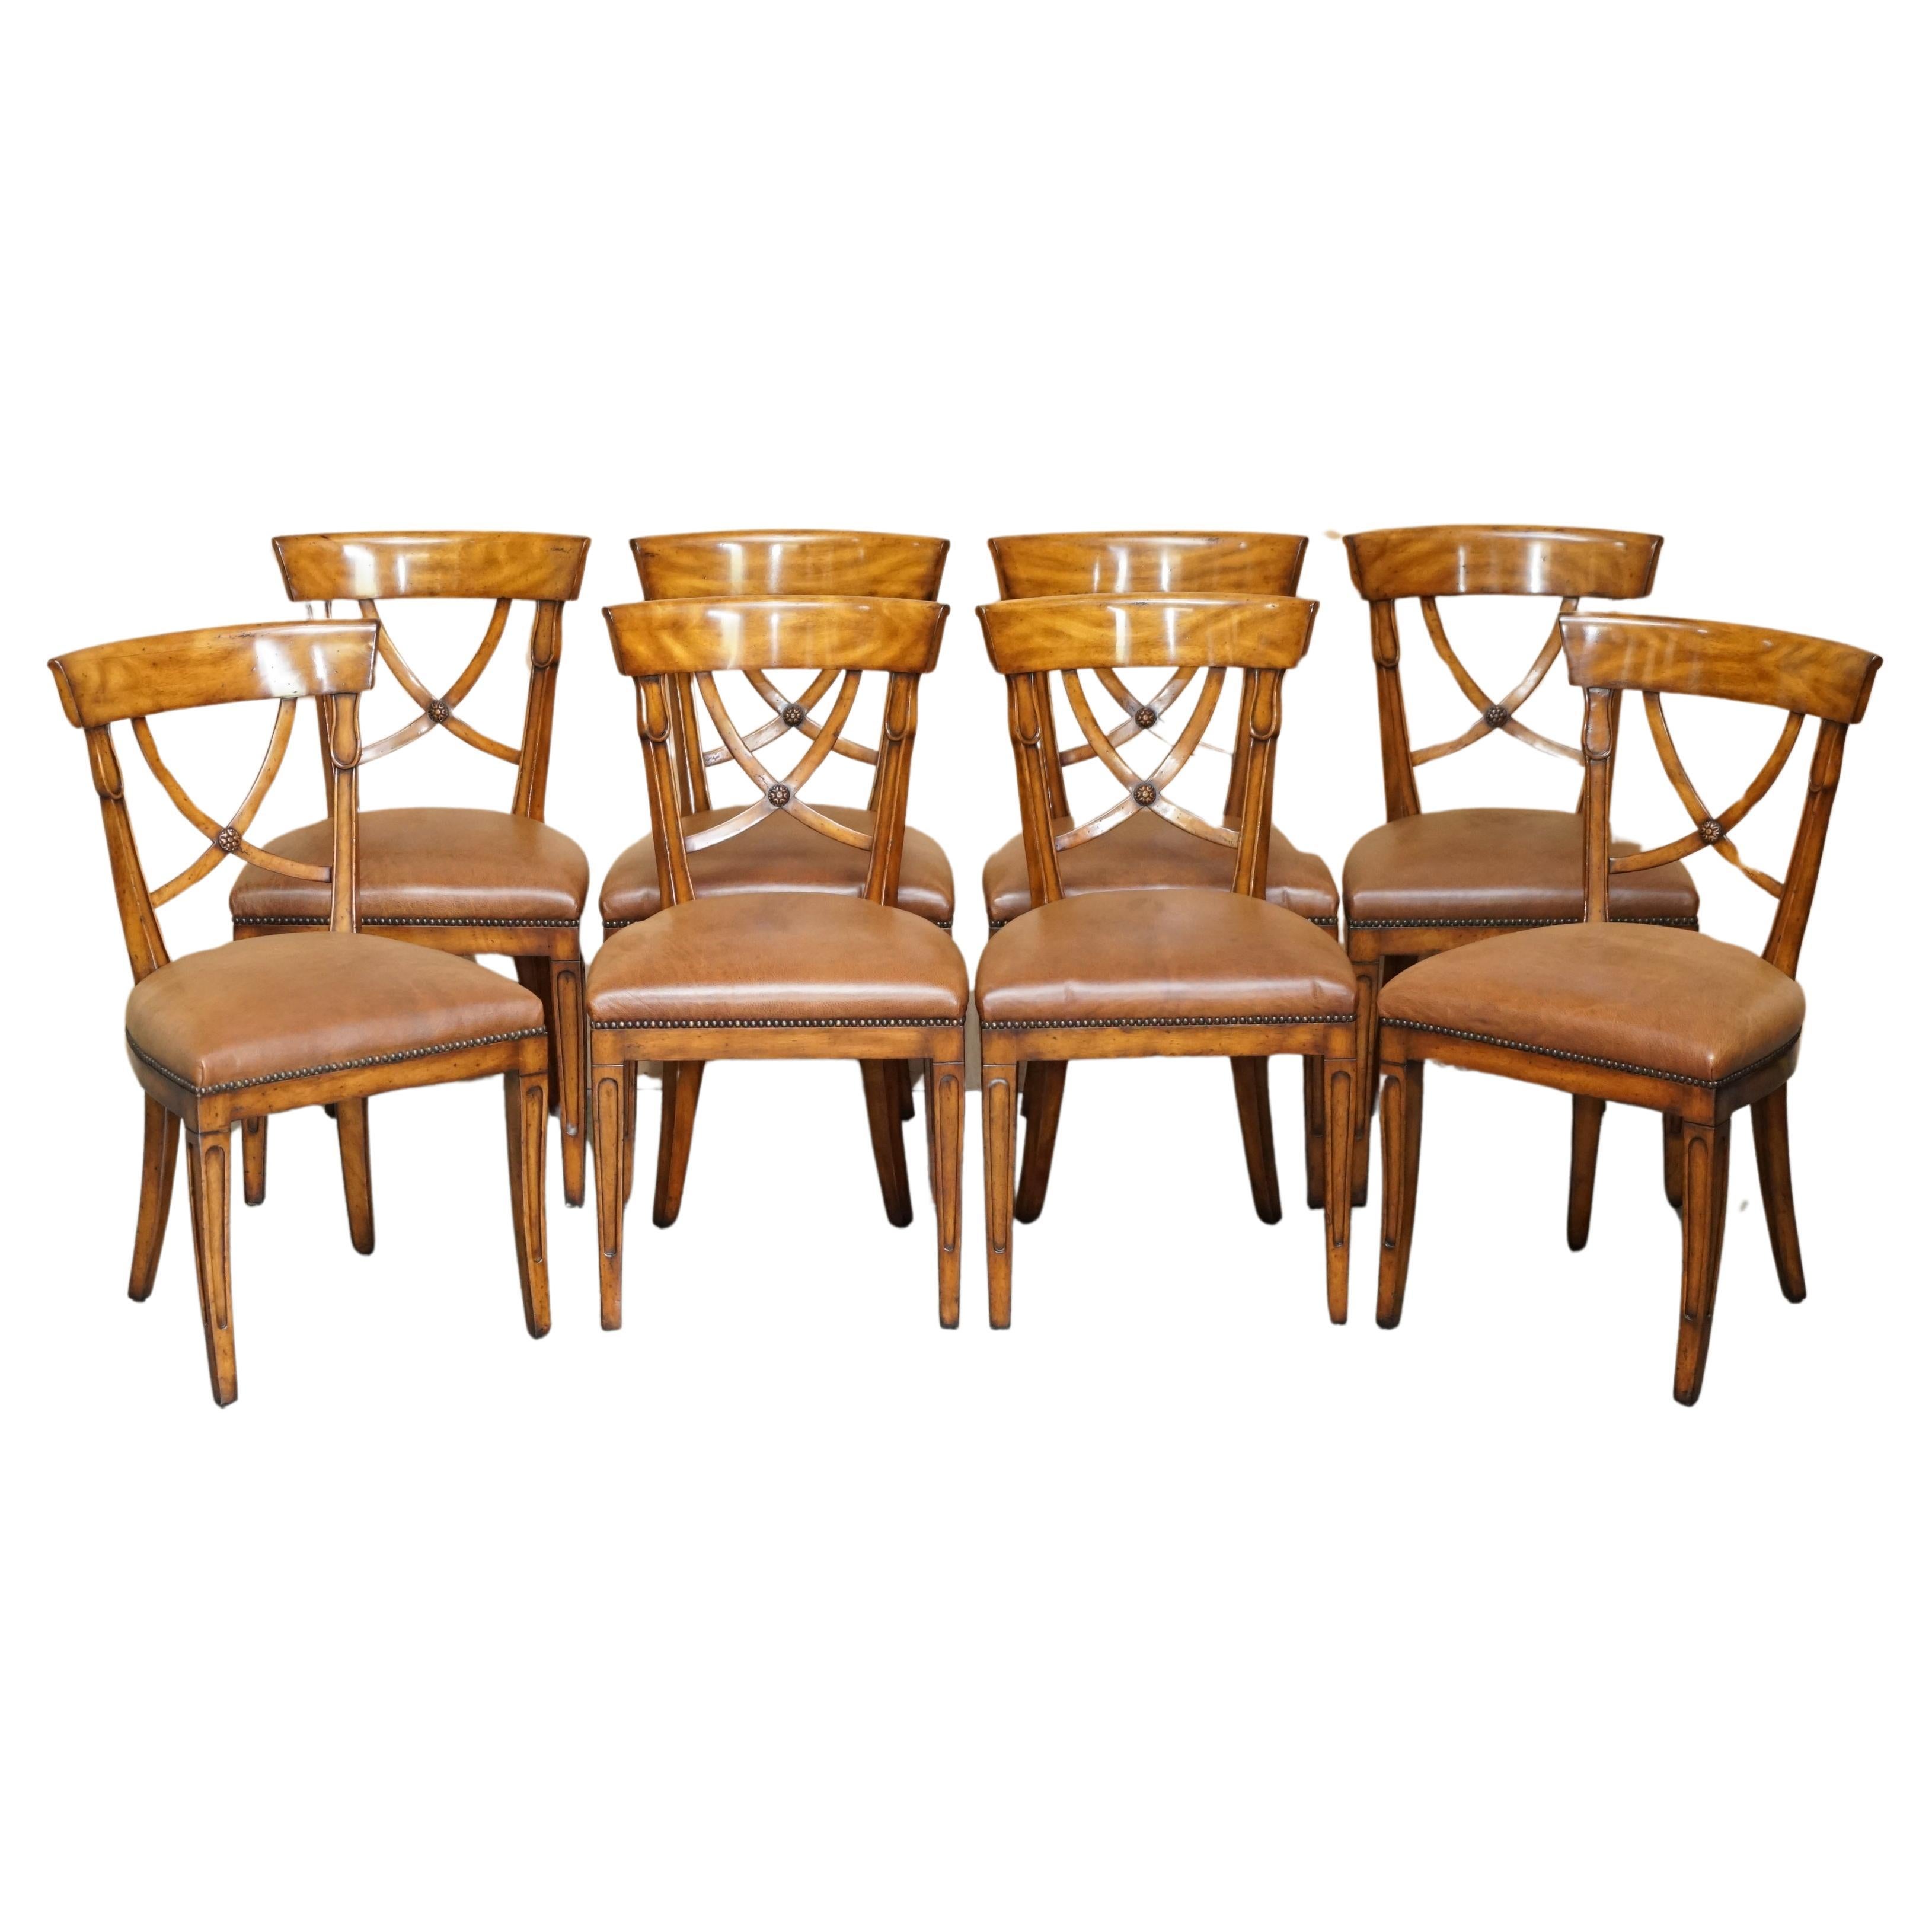 EIGHT STUNNING THEODORE ALEXANDER BROWN LEATHER EMBOSSED DiNING CHAIRS PART SET For Sale